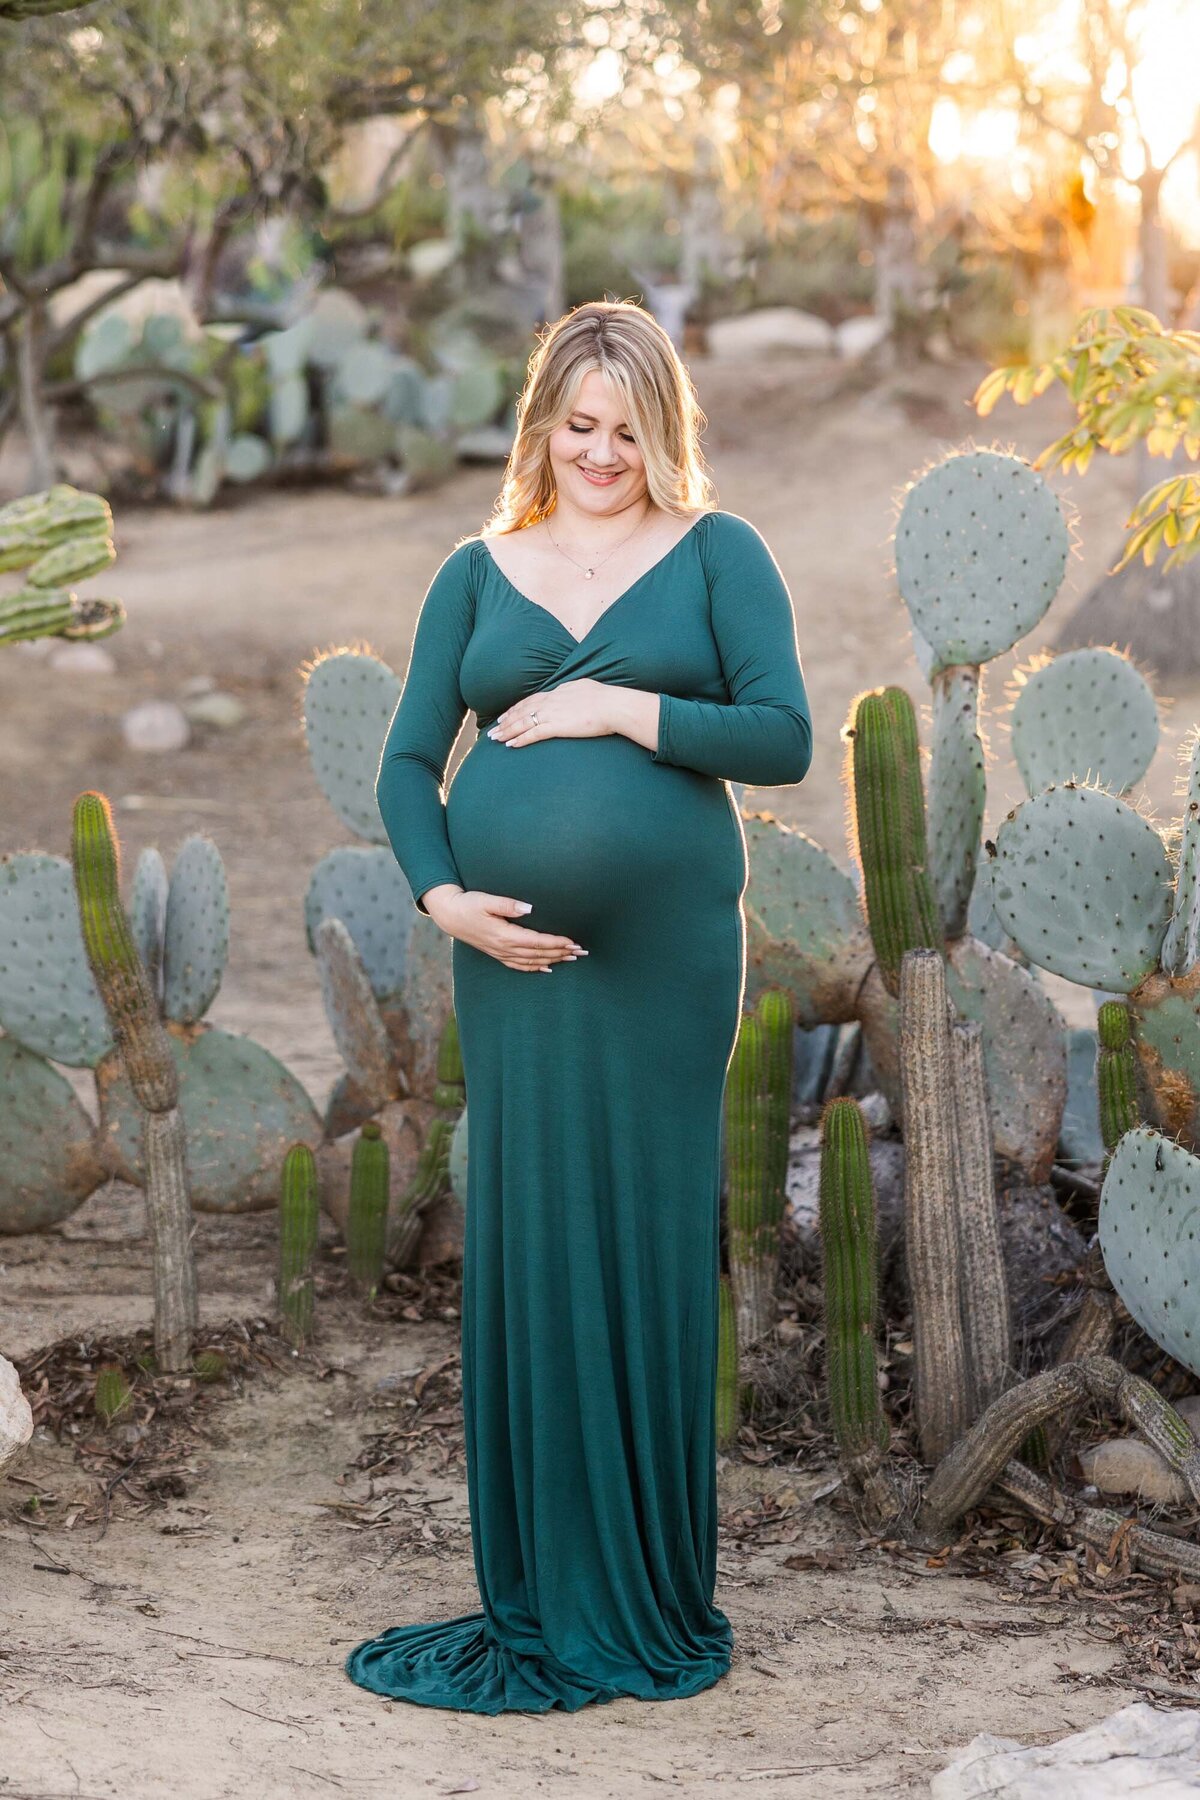 balboa-park-cactus-garden-maternity-photo-session-mother-by-cactus